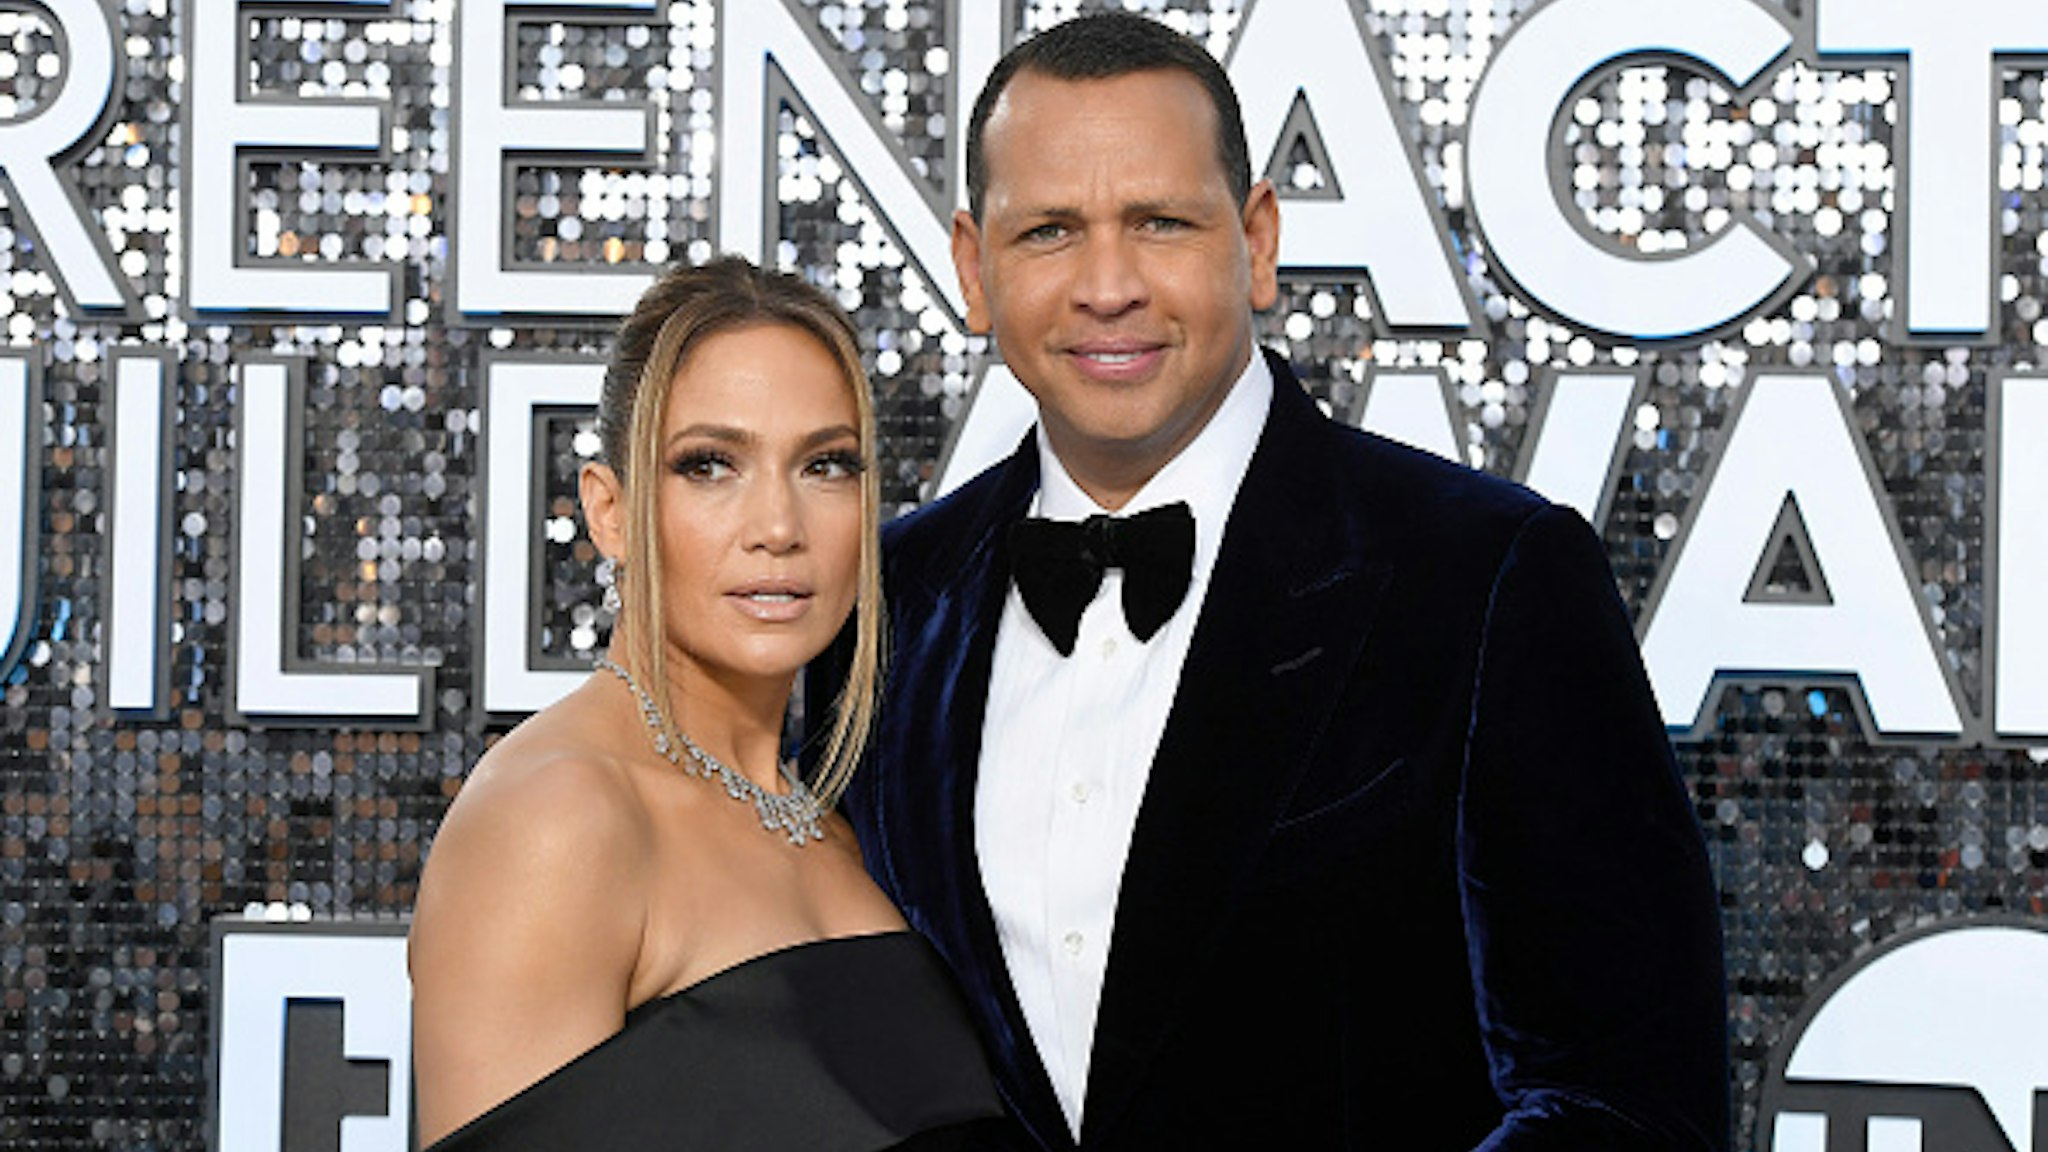 LOS ANGELES, CALIFORNIA - JANUARY 19: (L-R) Jennifer Lopez and Alex Rodriguez attend the 26th Annual Screen Actors Guild Awards at The Shrine Auditorium on January 19, 2020 in Los Angeles, California.